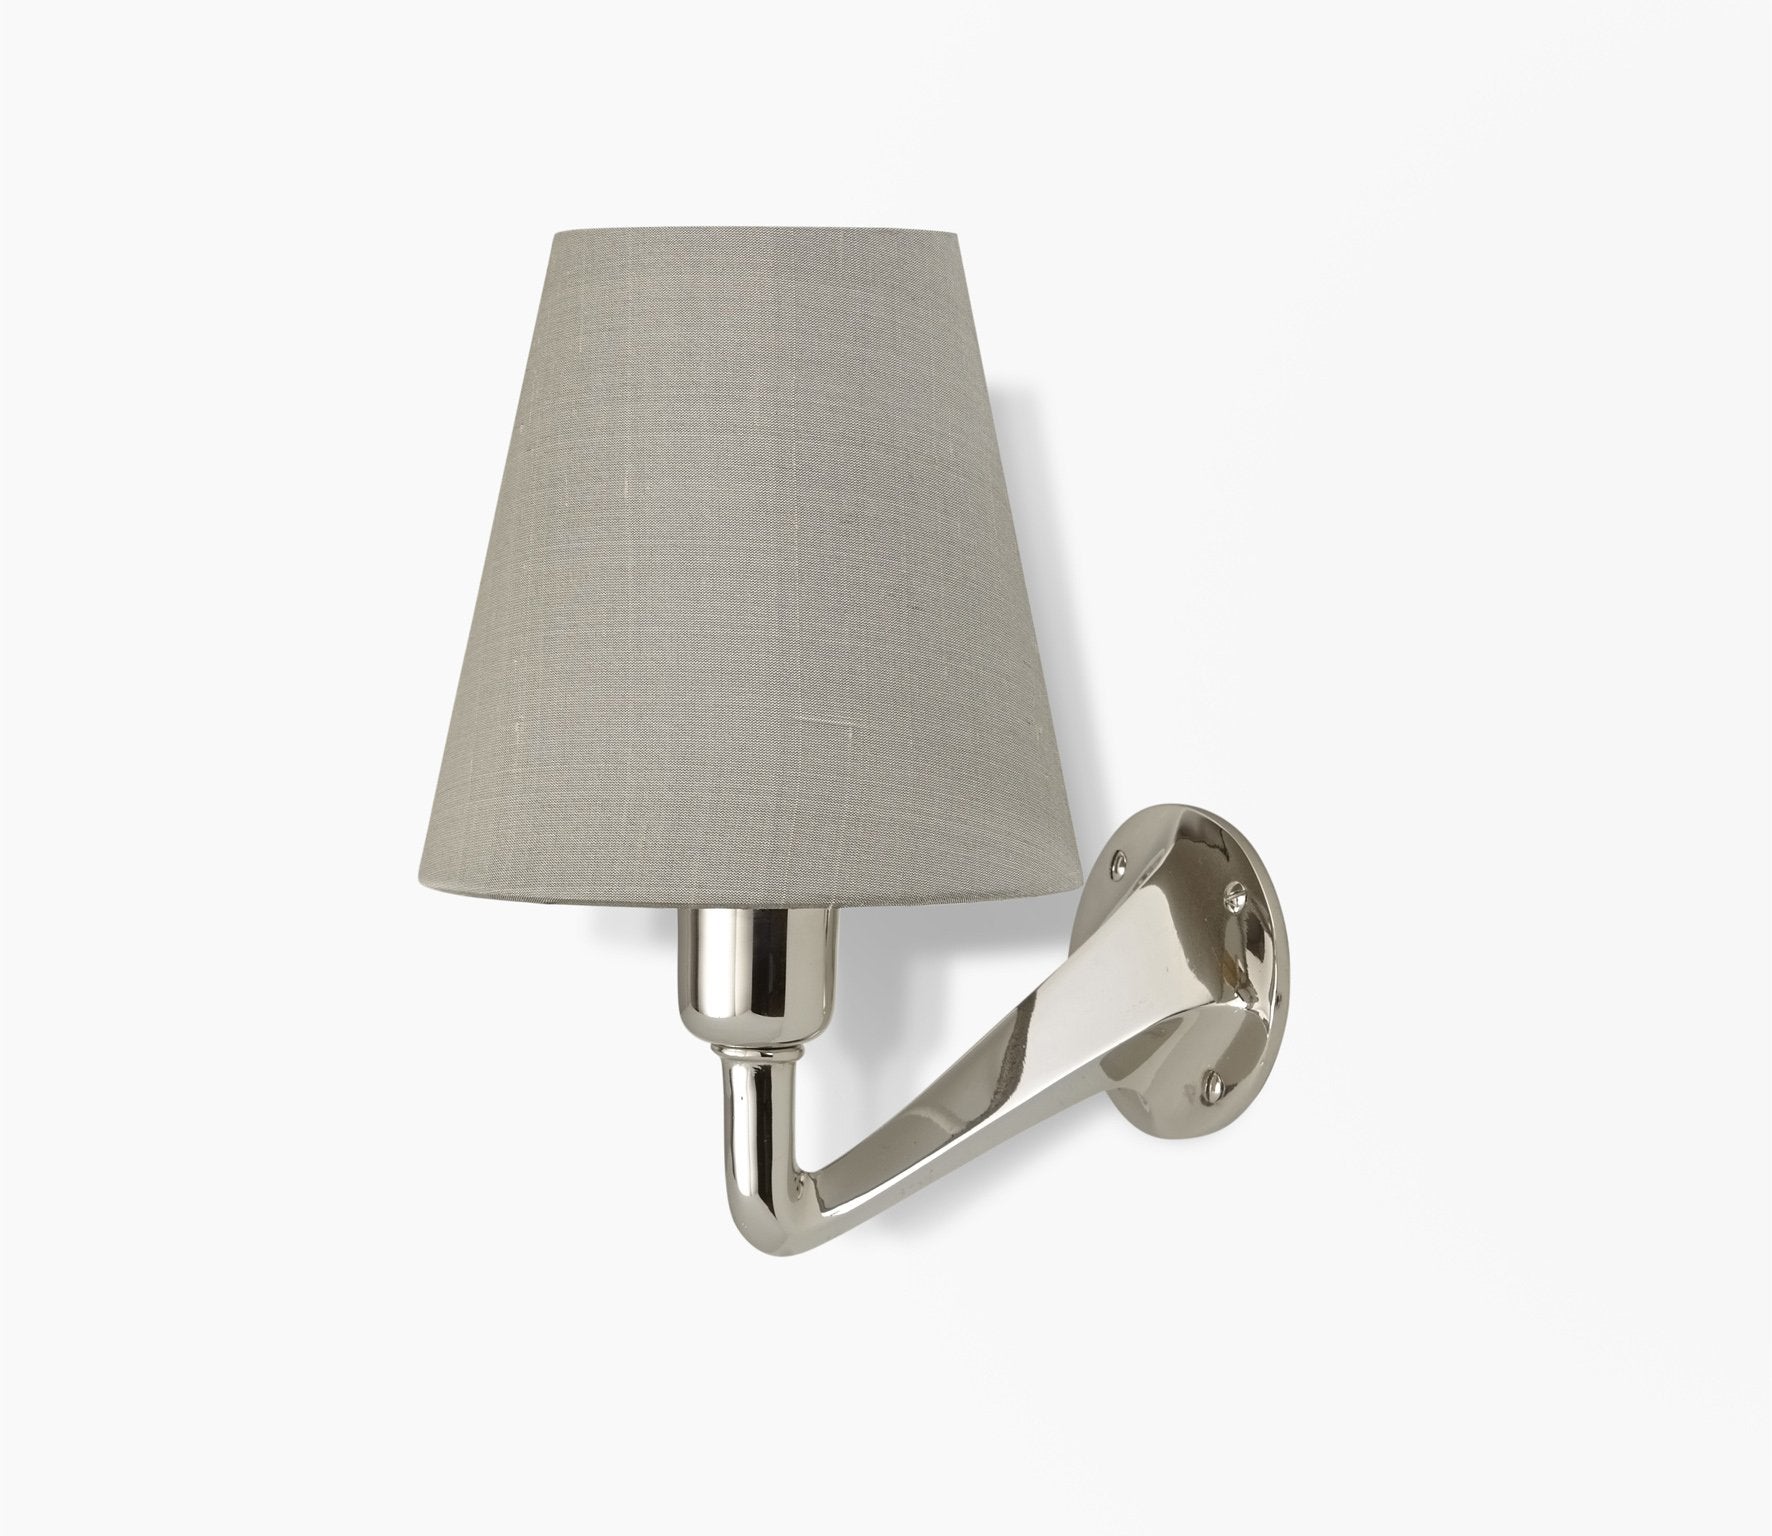 Leila Wall Light with Plain Empire Shade Product Image 8